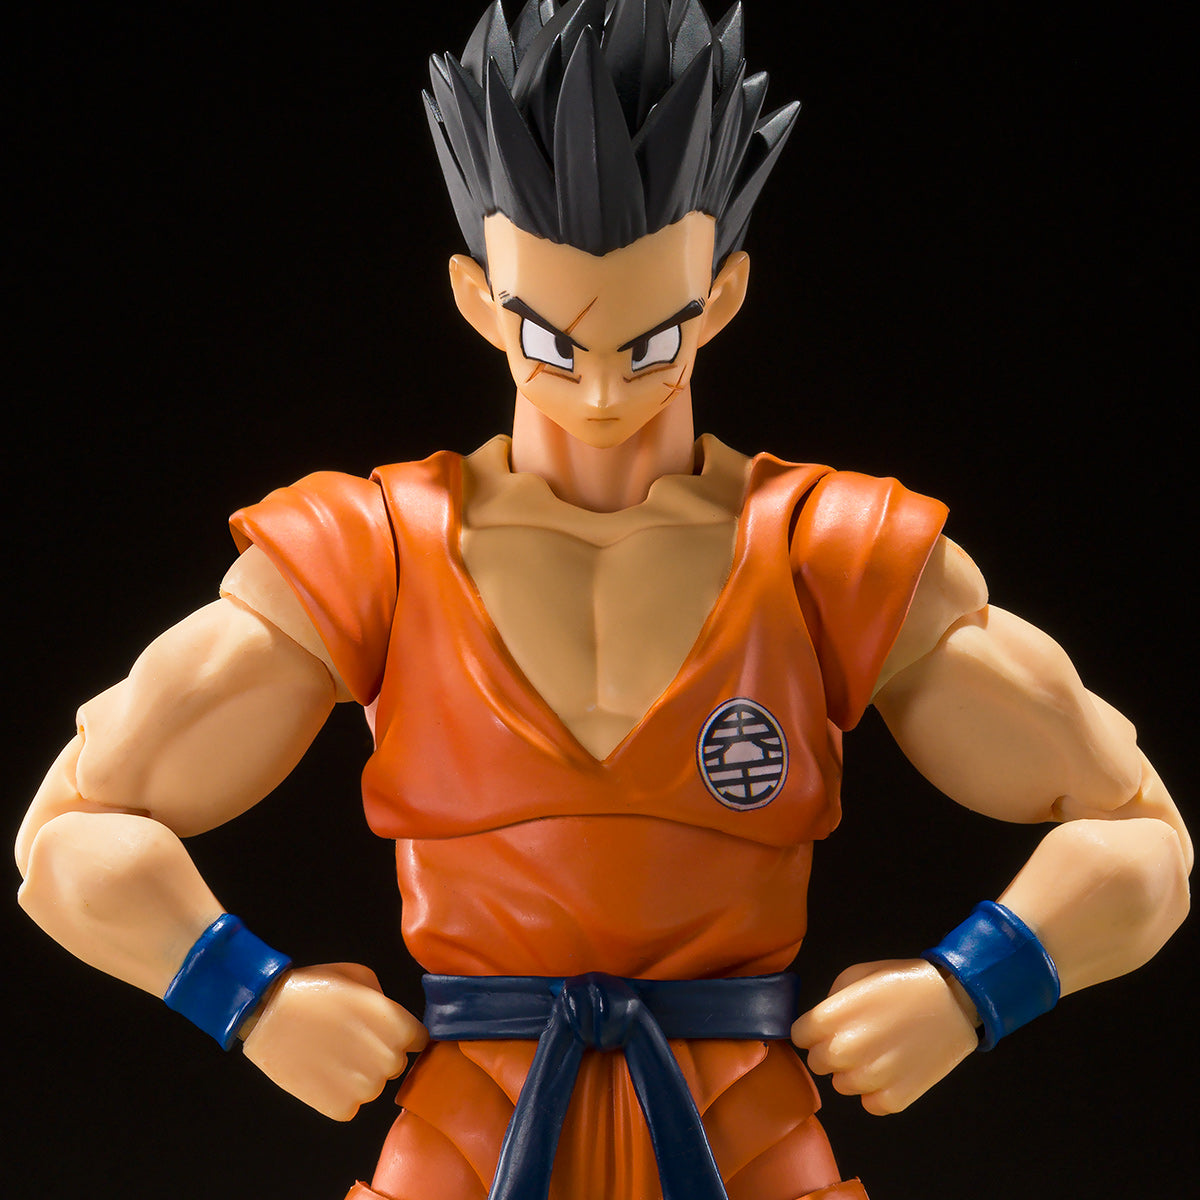 [IN STOCK in AU] S.H.Figuarts Dragon Ball Z Yamcha Earth's Foremost Fighter